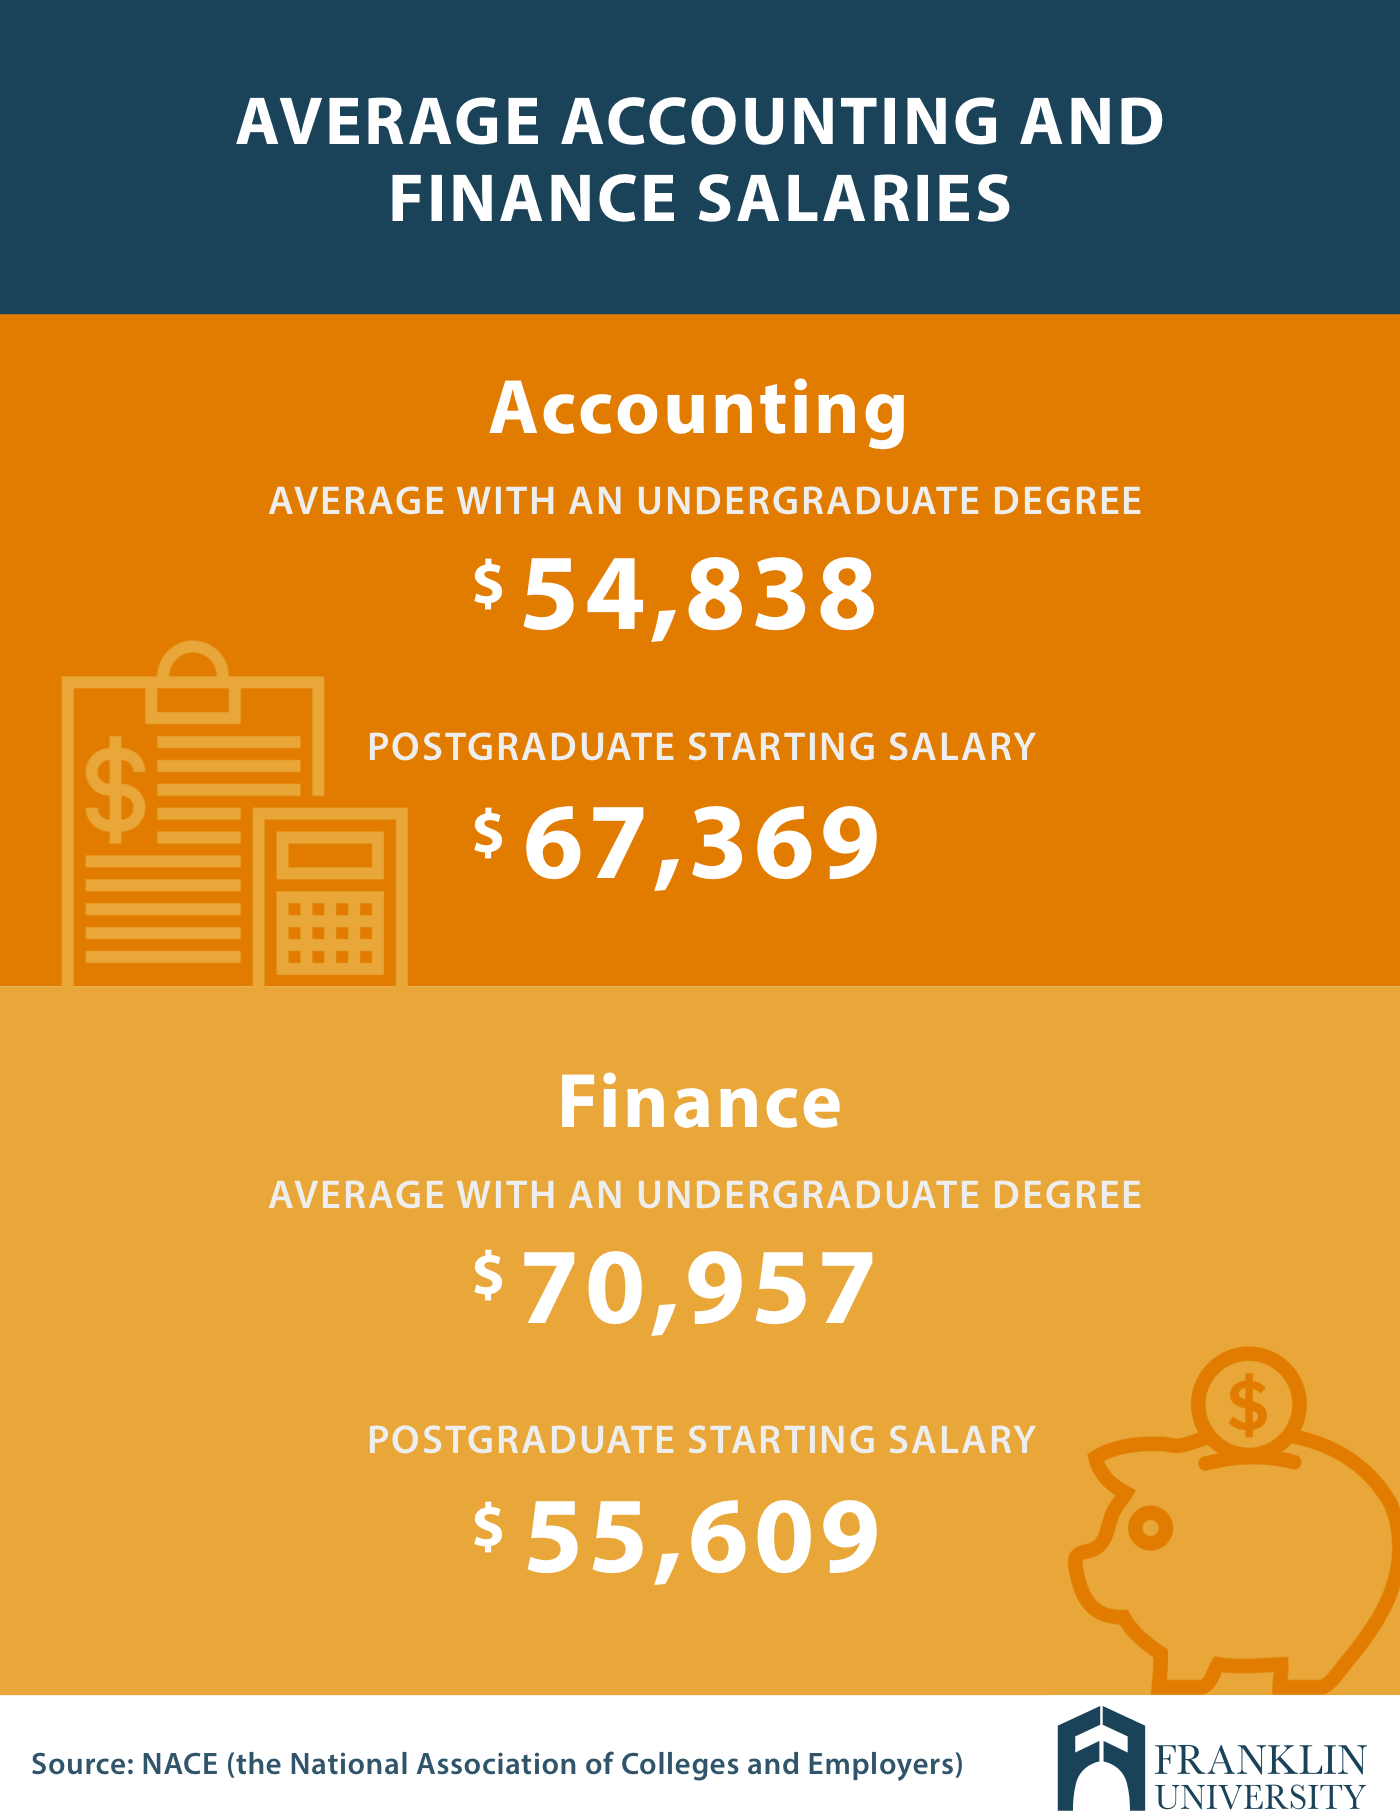 can you be an accountant with a finance degree?